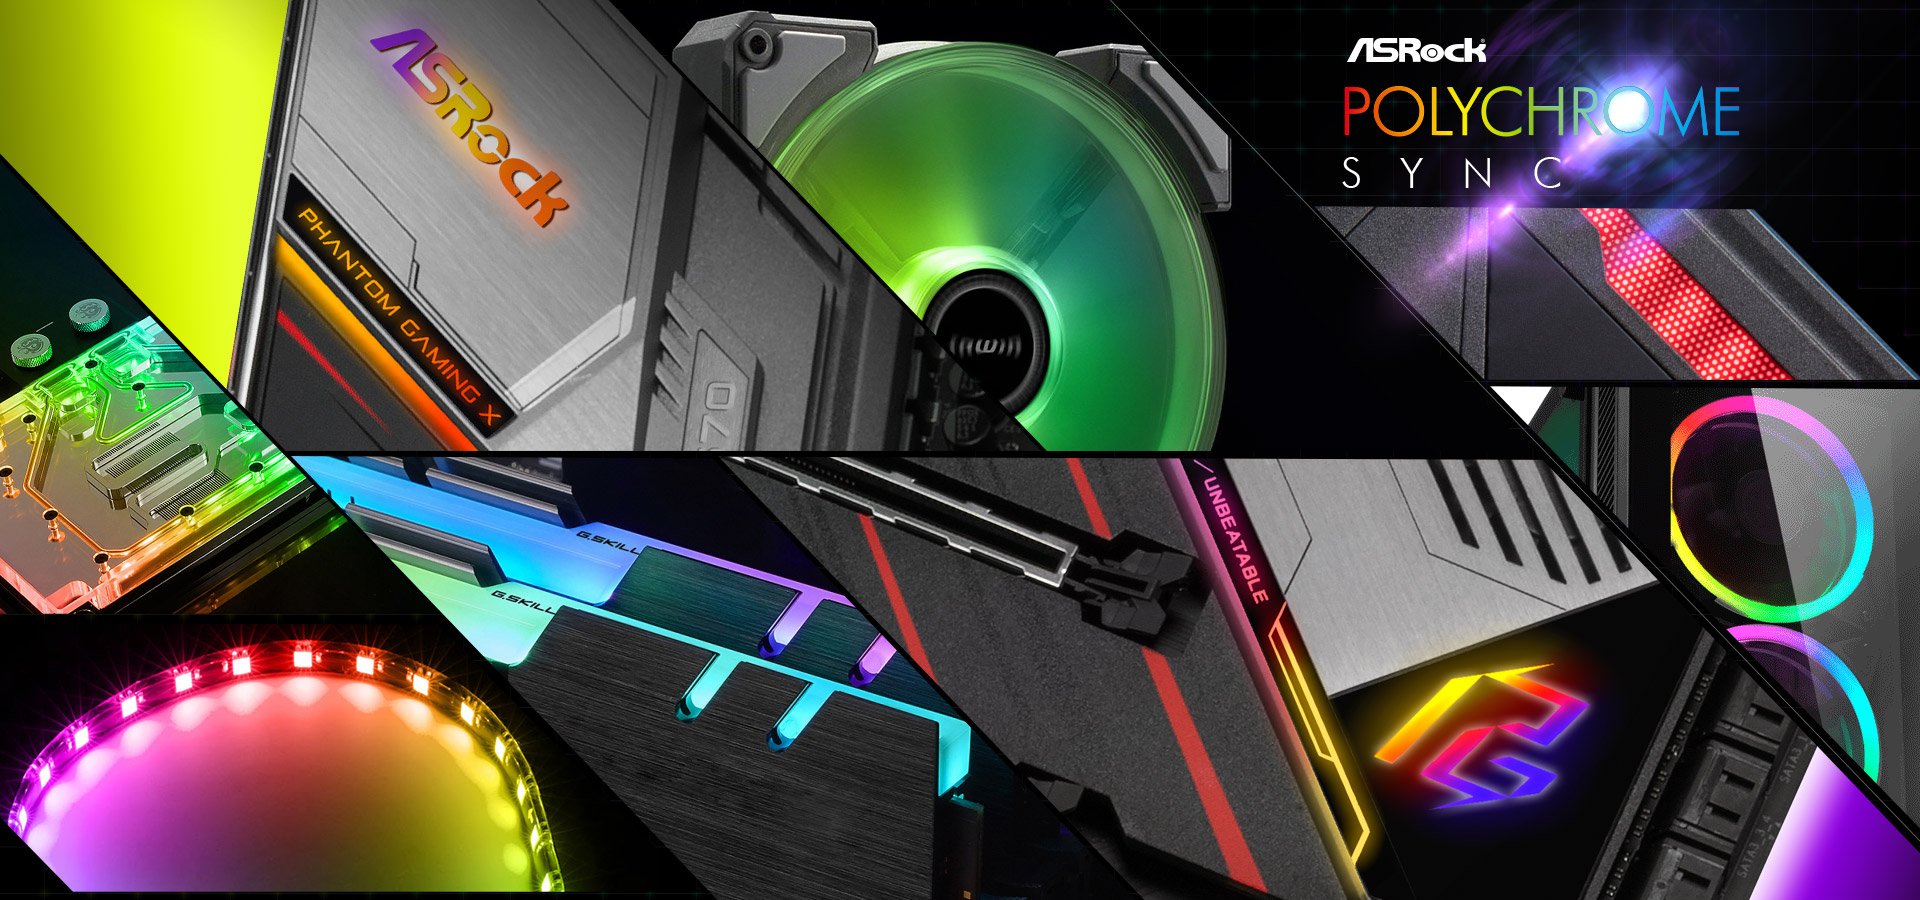 Different Closeup Shots of RGB-Lit Components and the RGB-Lit Areas on the ASRock X570 Phantom Gaming X Motherboard